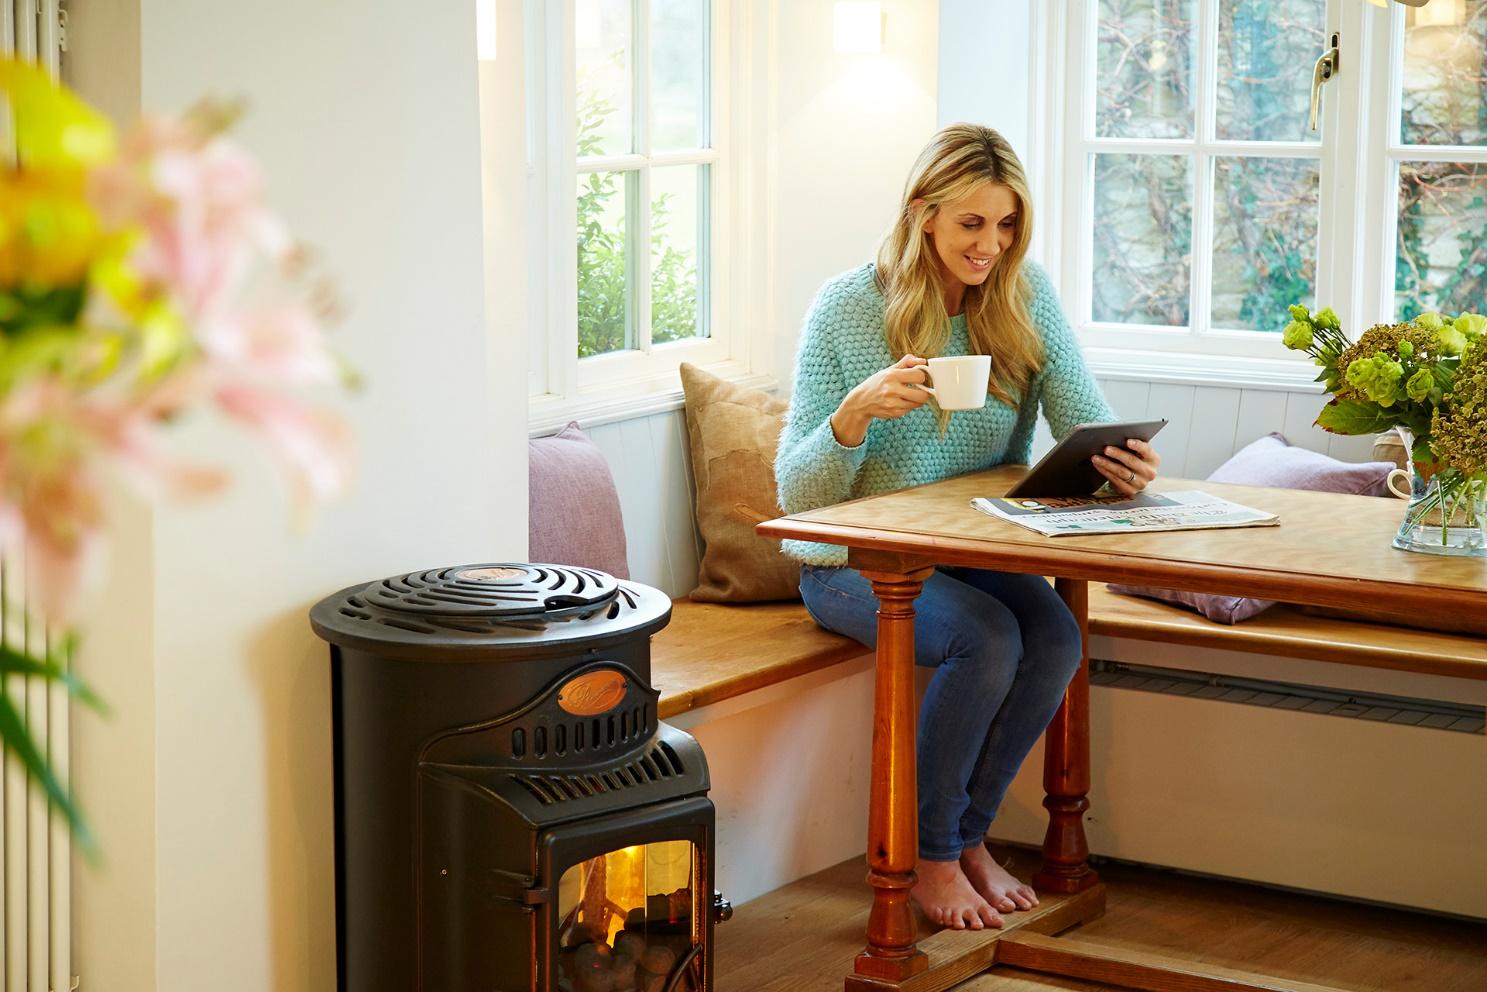 Portable Gas Heater Safety: Safety Tips on LPG Heater Safety | Calor